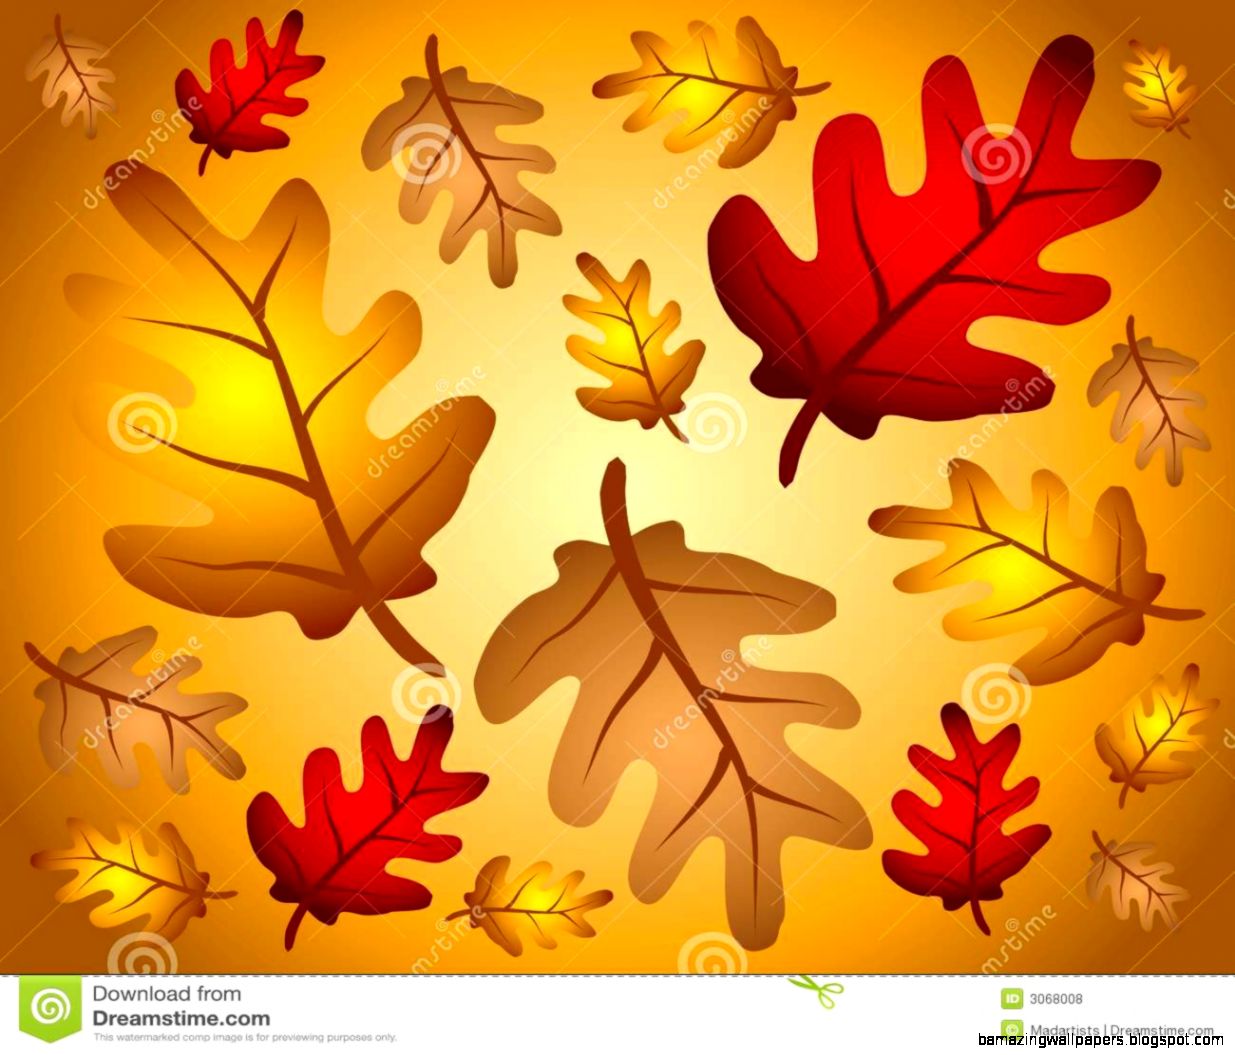 Autumn Oak Tree Leaves Clipart Royalty Free Stock Images Image